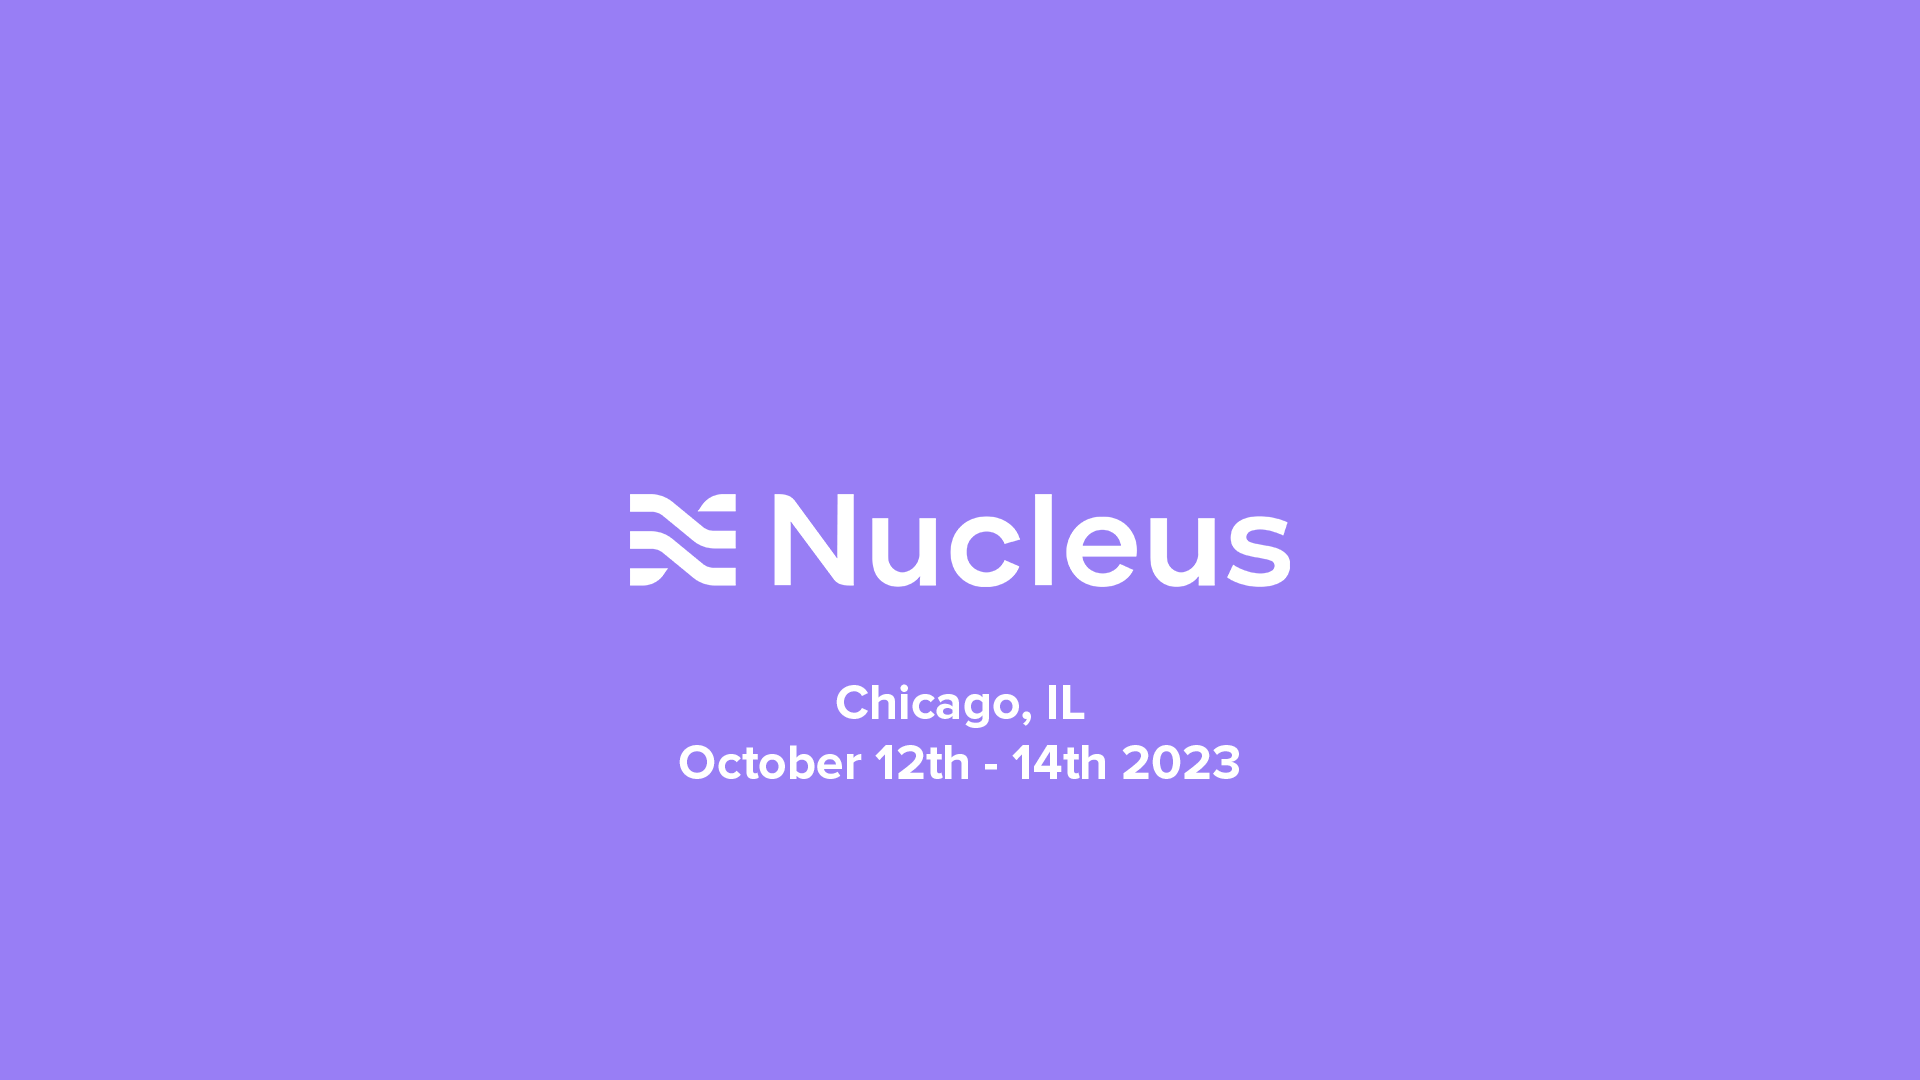 Dates of ANCC 2023 Conference in Chicago, IL with Nucleus logo